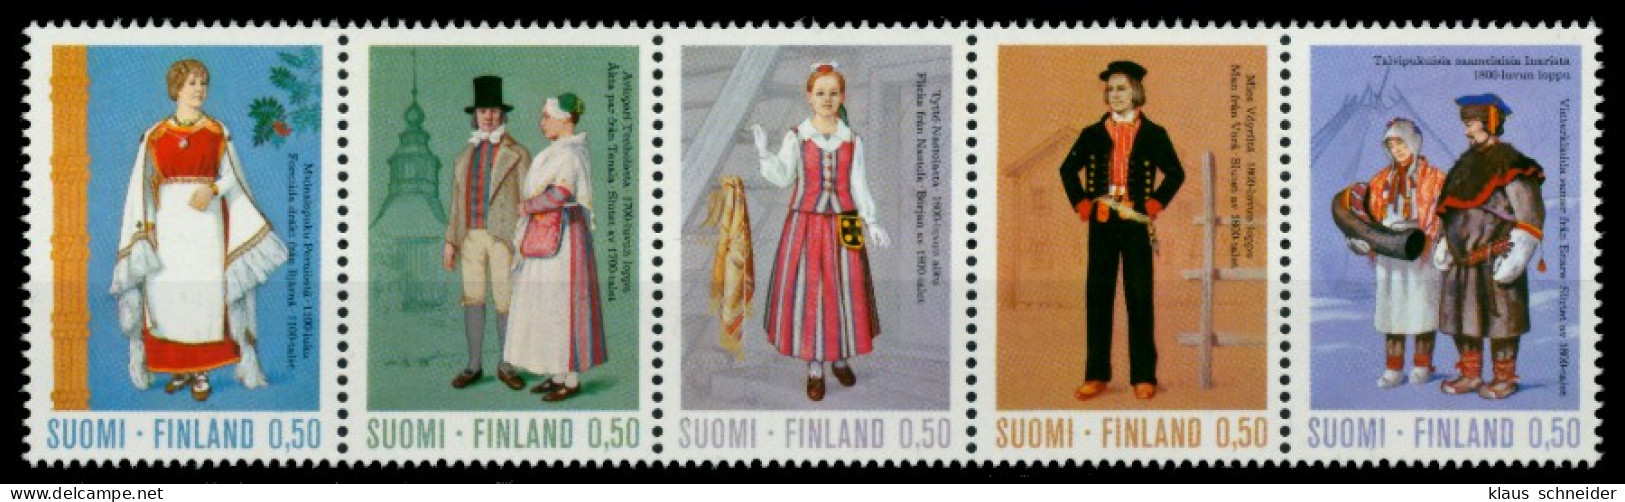 FINNLAND Nr 710-714 BRIEF 5ER STR S033452 - Covers & Documents